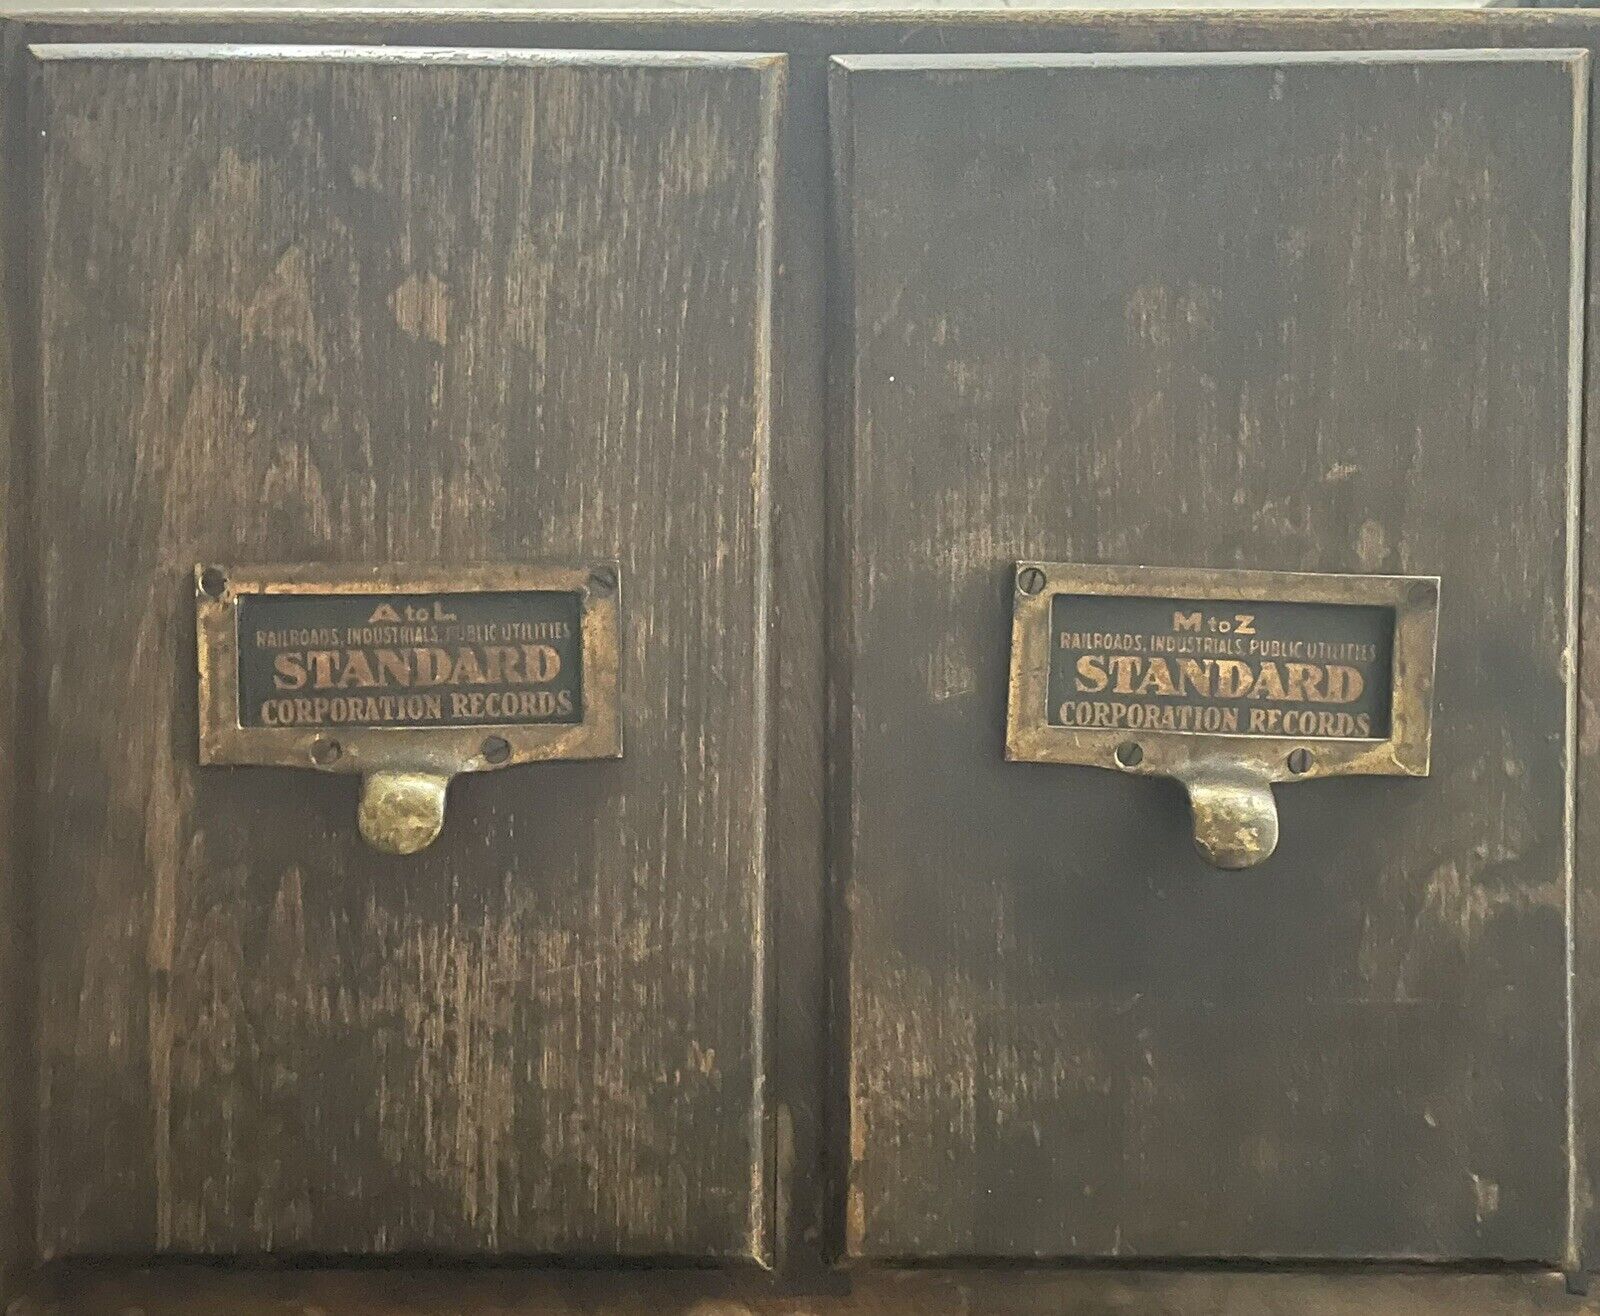 A to L Railroad Industrial Public Utility STANDARD Corp. Records File Cabinet